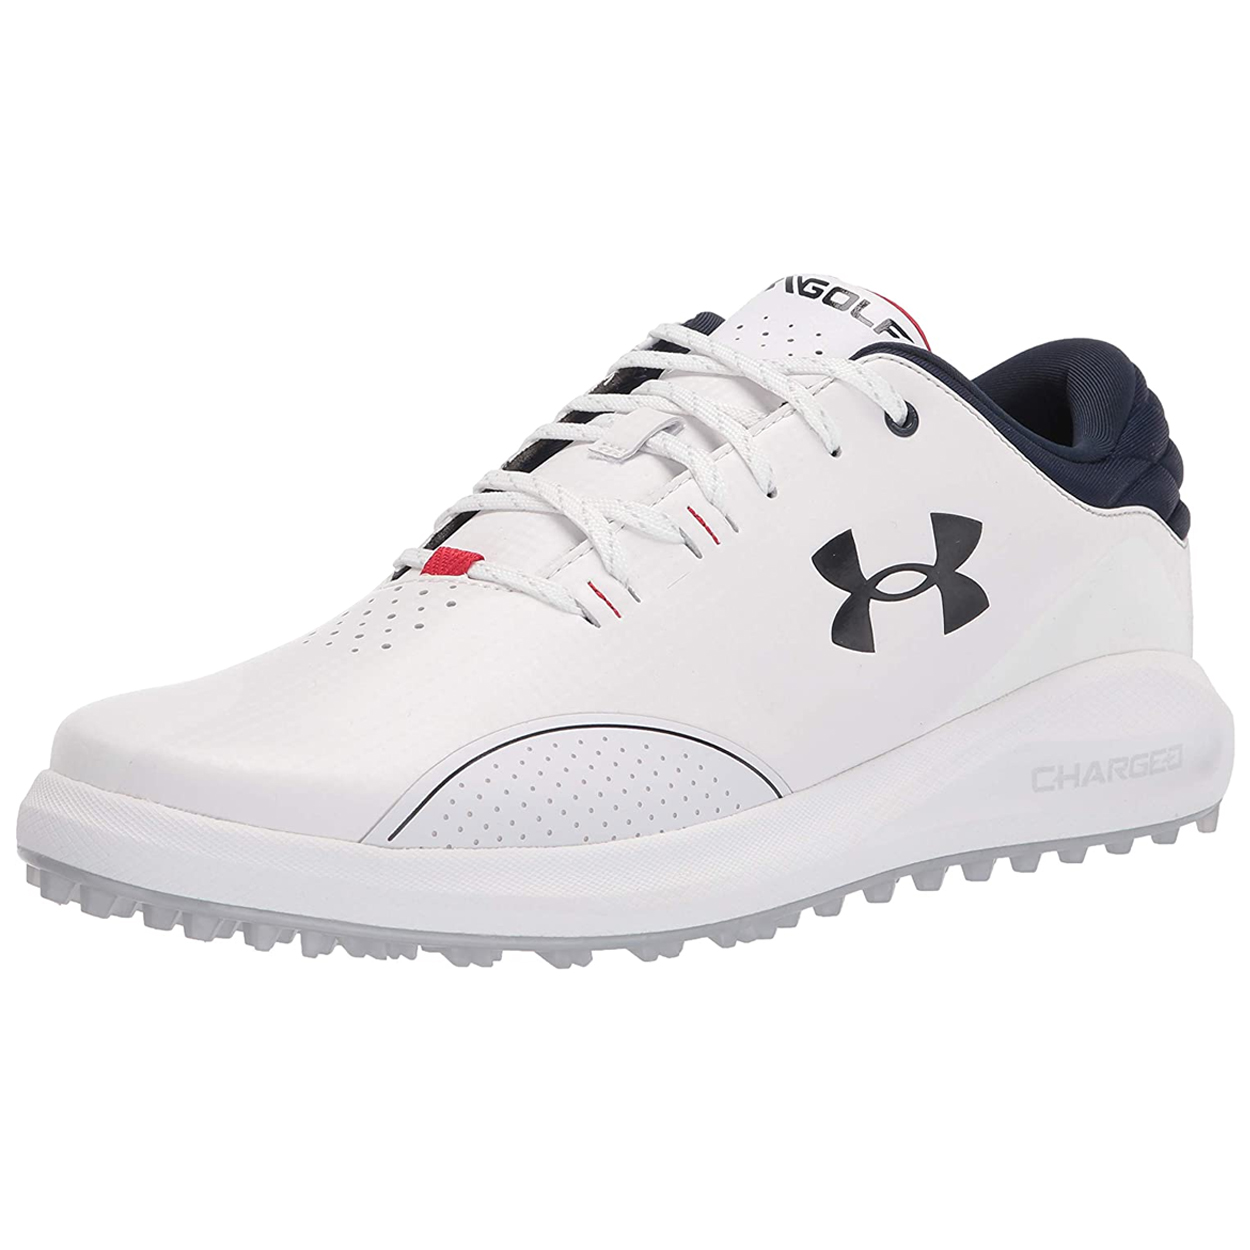 Women's Charged Breathe 2 Knit SL Spikeless Golf Shoe - Grey, UNDER ARMOUR